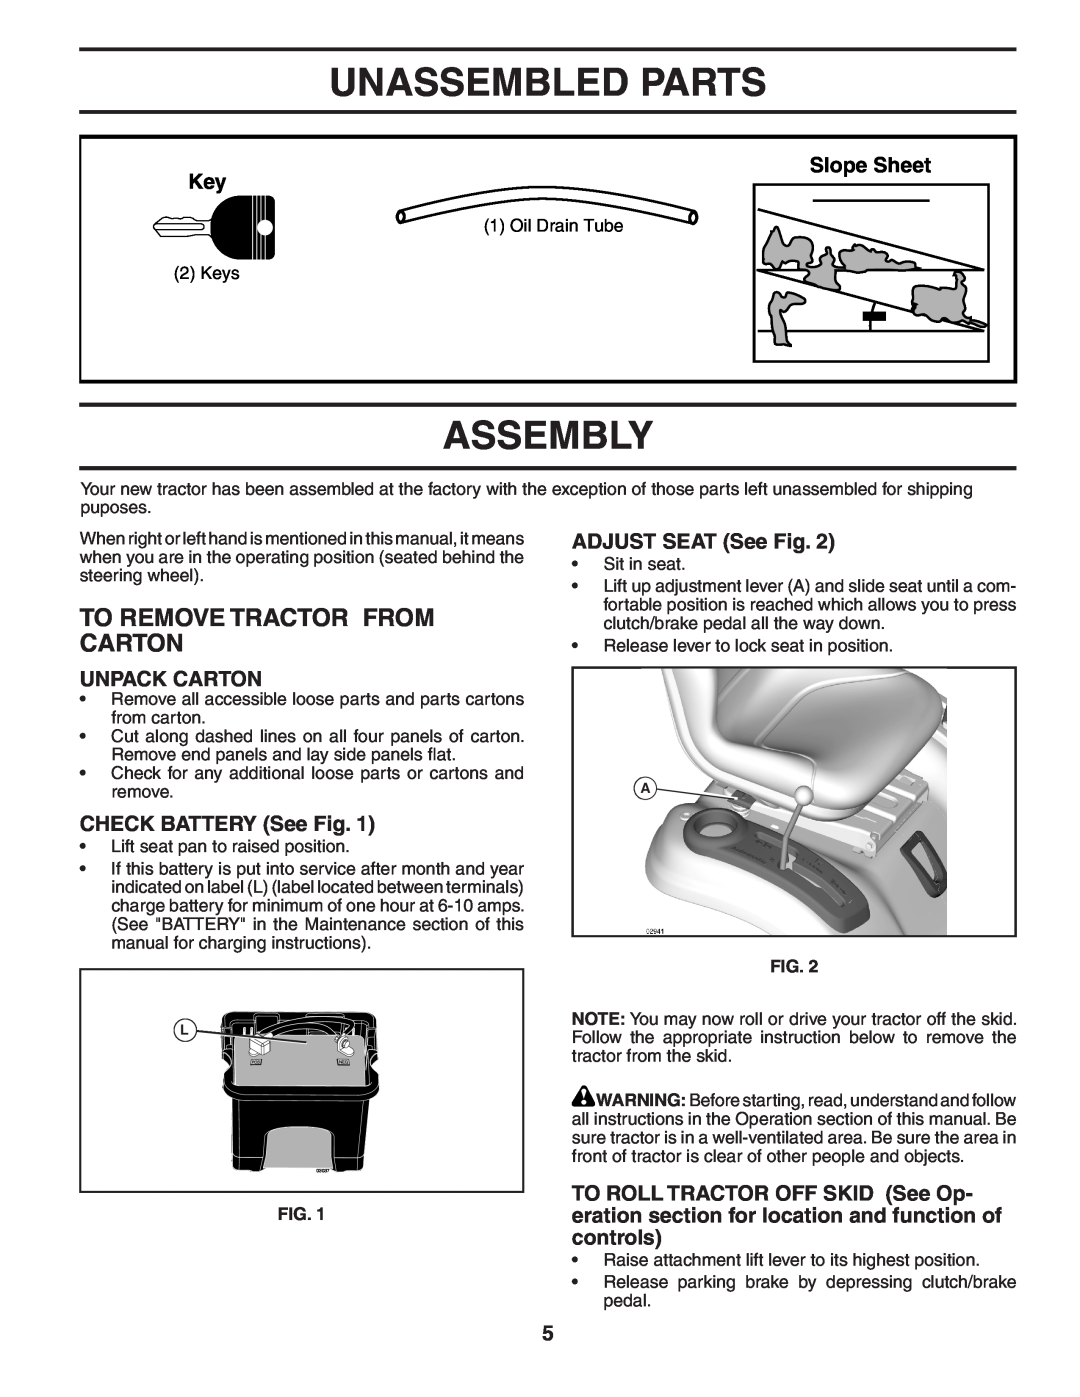 Poulan 402993 manual Unassembled Parts, Assembly, To Remove Tractor From Carton, Slope Sheet Key, Unpack Carton 